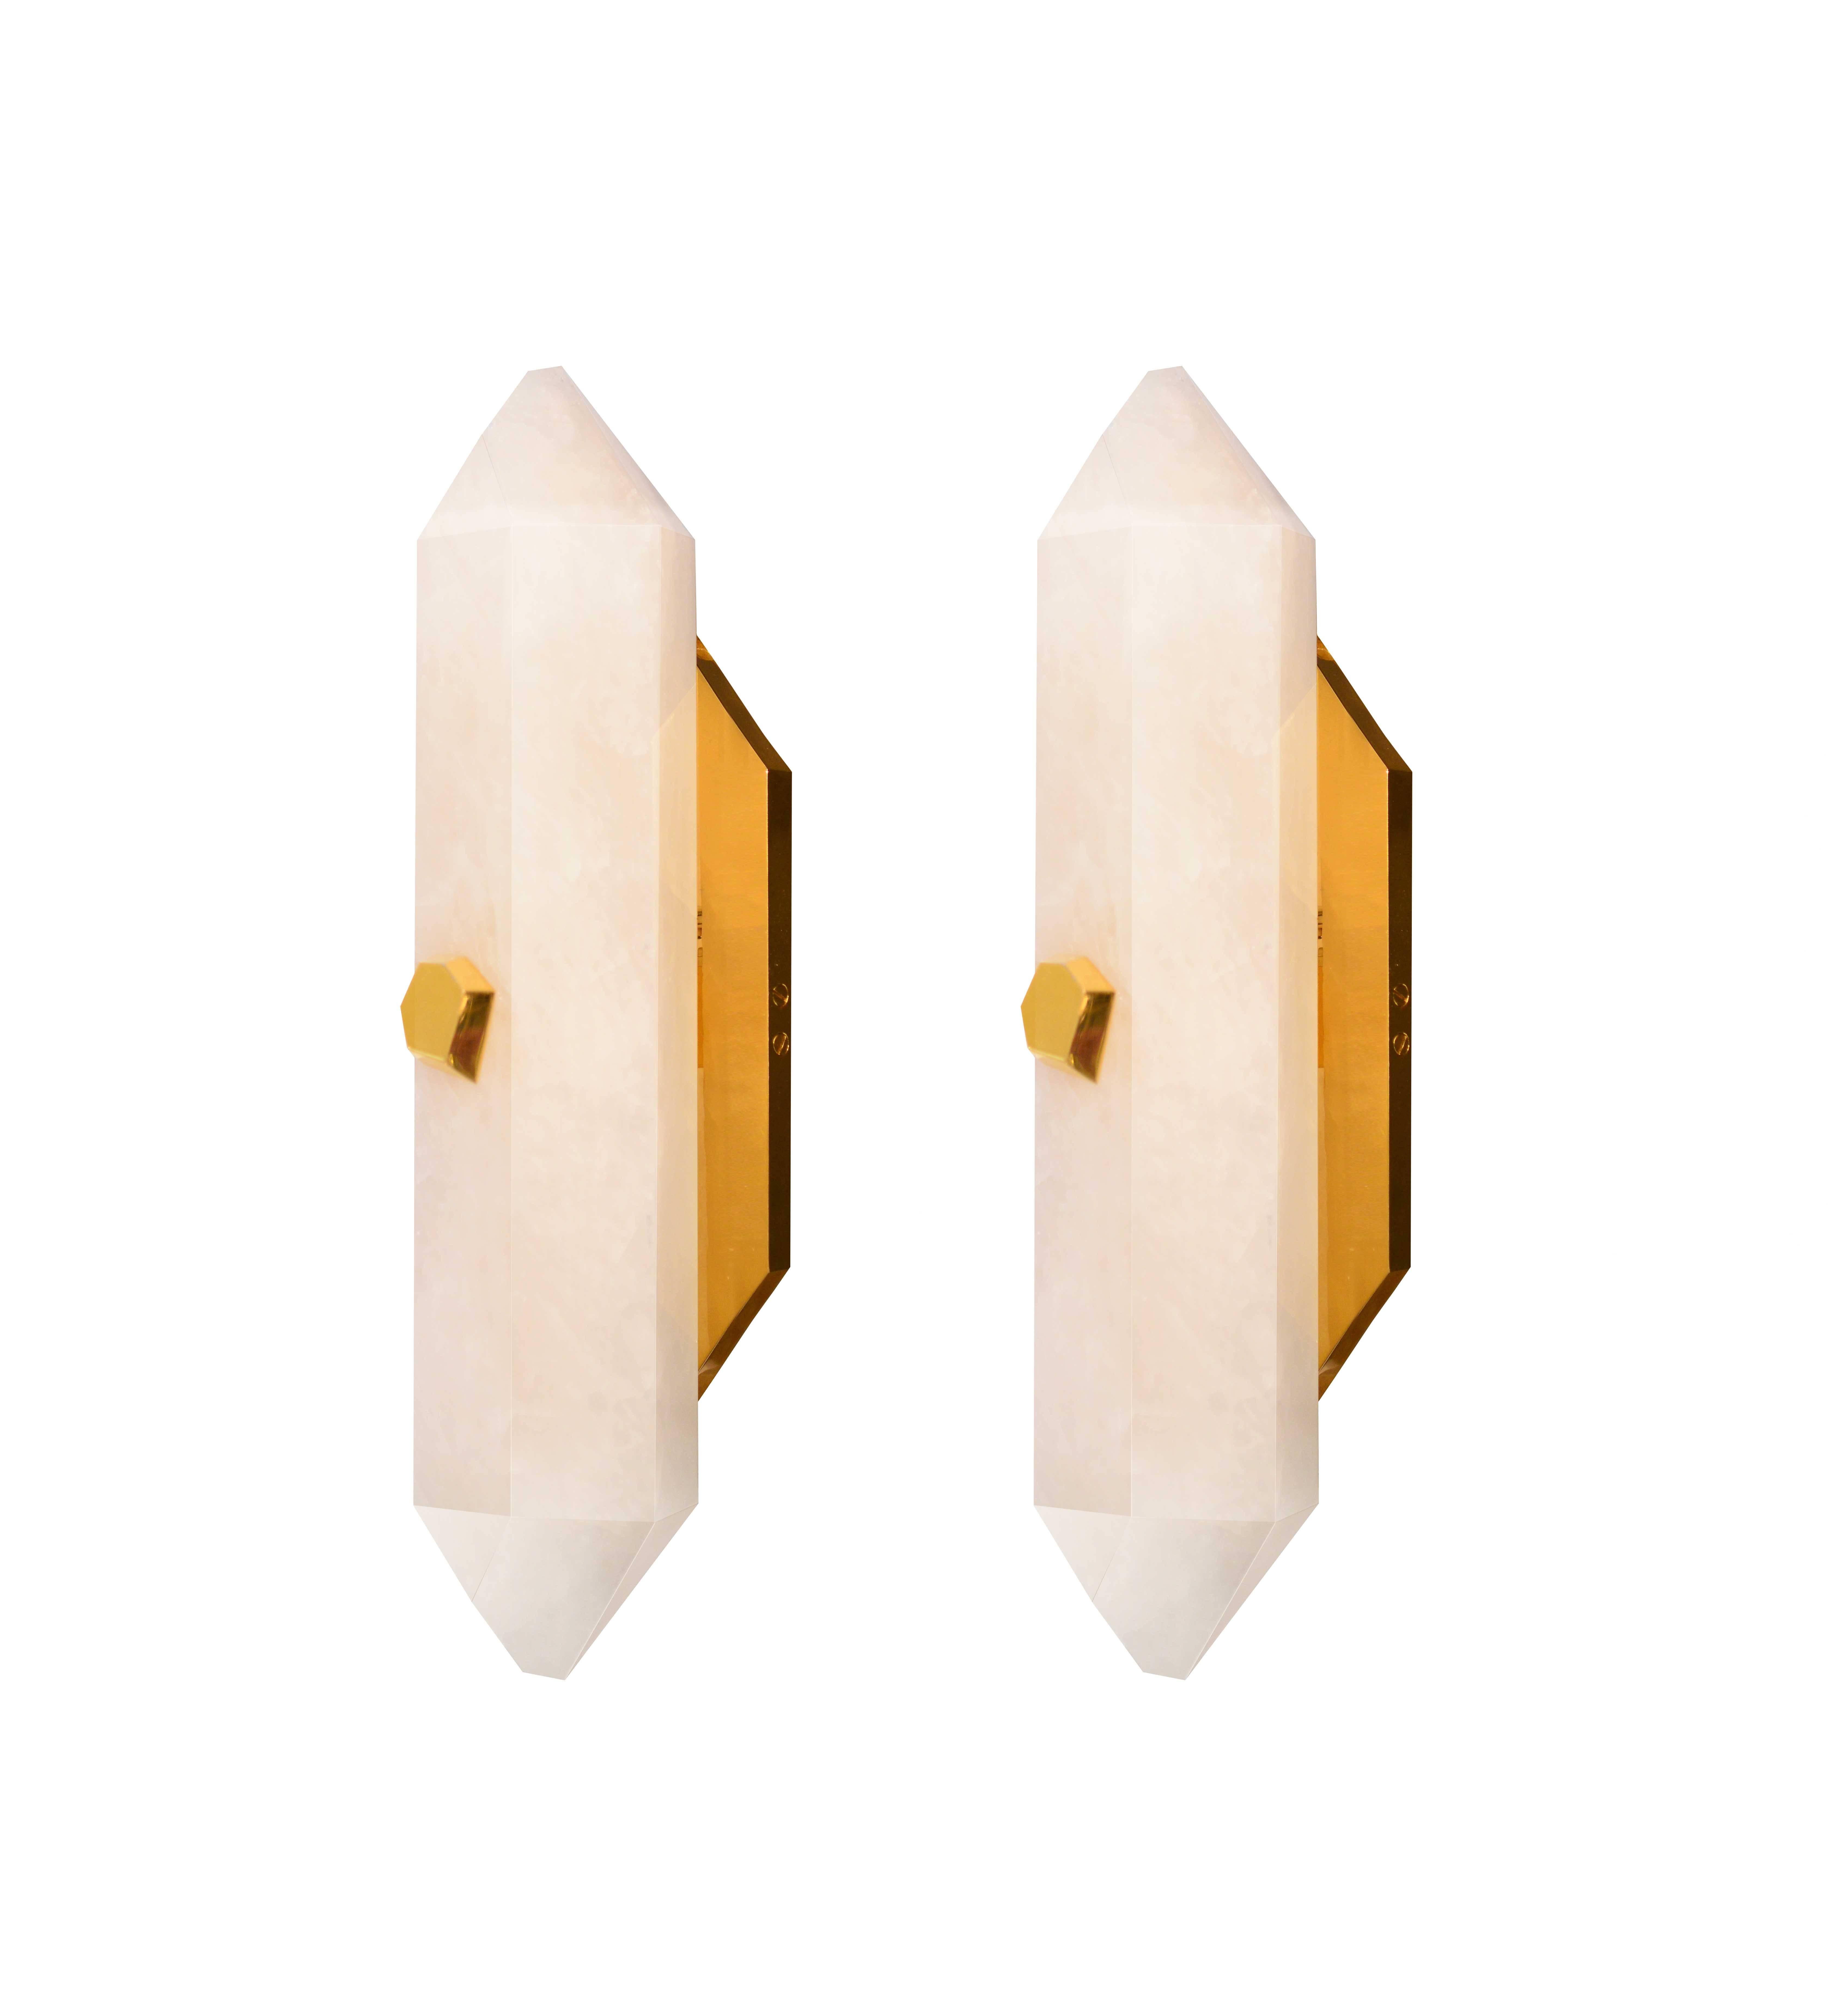 A fine carved diamond form rock crystal quartz wall sconces with diamond form polish brass bolt, created by Phoenix Gallery, NYC.
Multiple lot available.
Custom measurement and finish available. 
Each sconces installed two sockets, and will